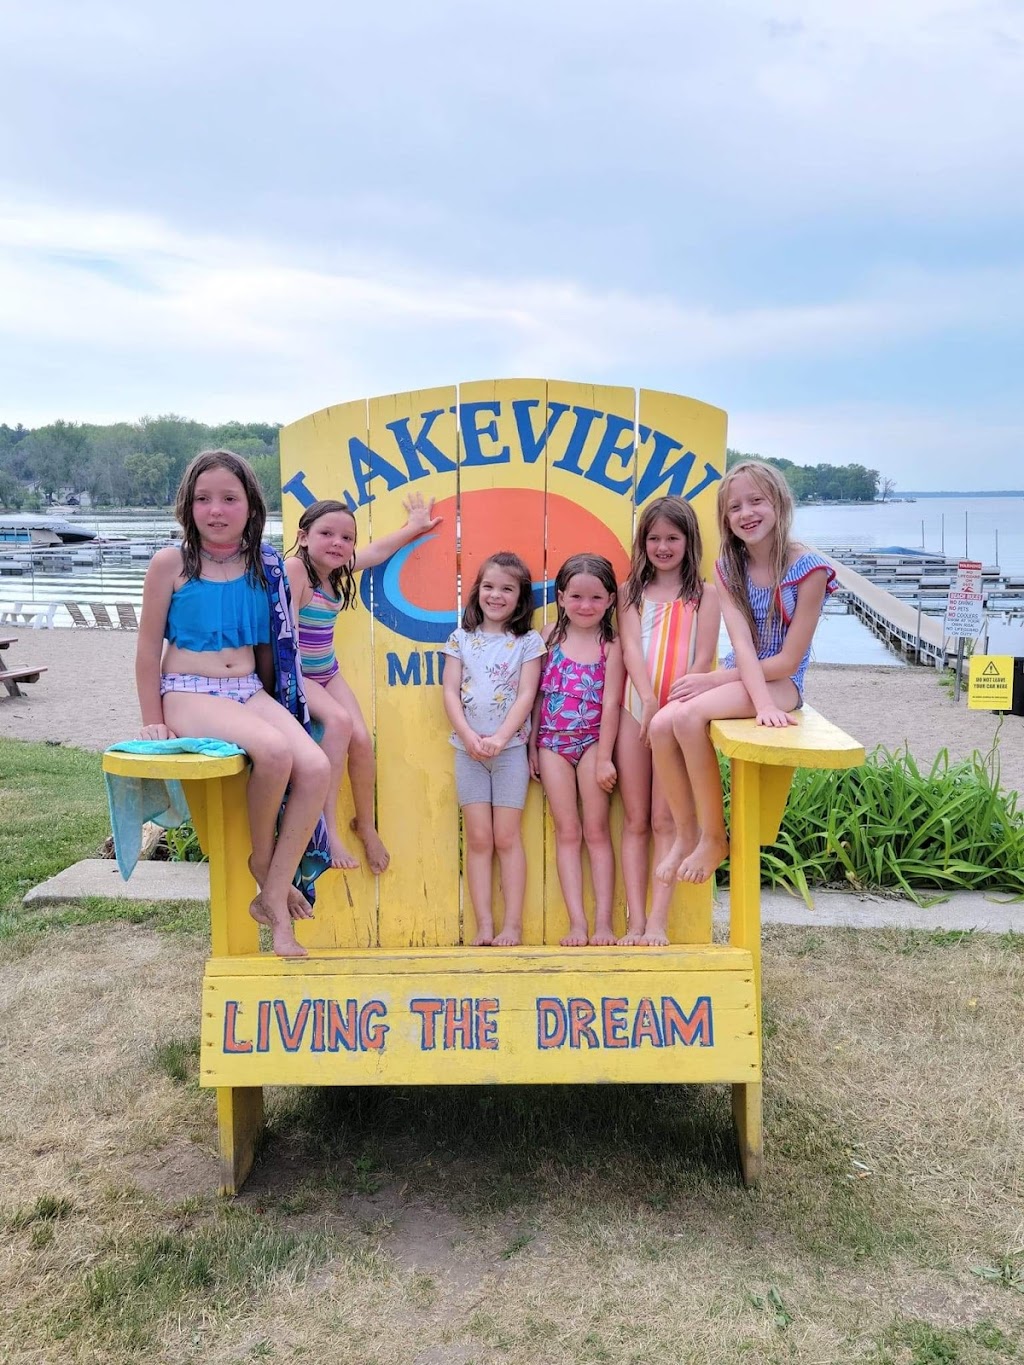 Pettits Lakeview Campground and Bar | 1901 WI-59, Milton, WI 53563 | Phone: (608) 868-7800